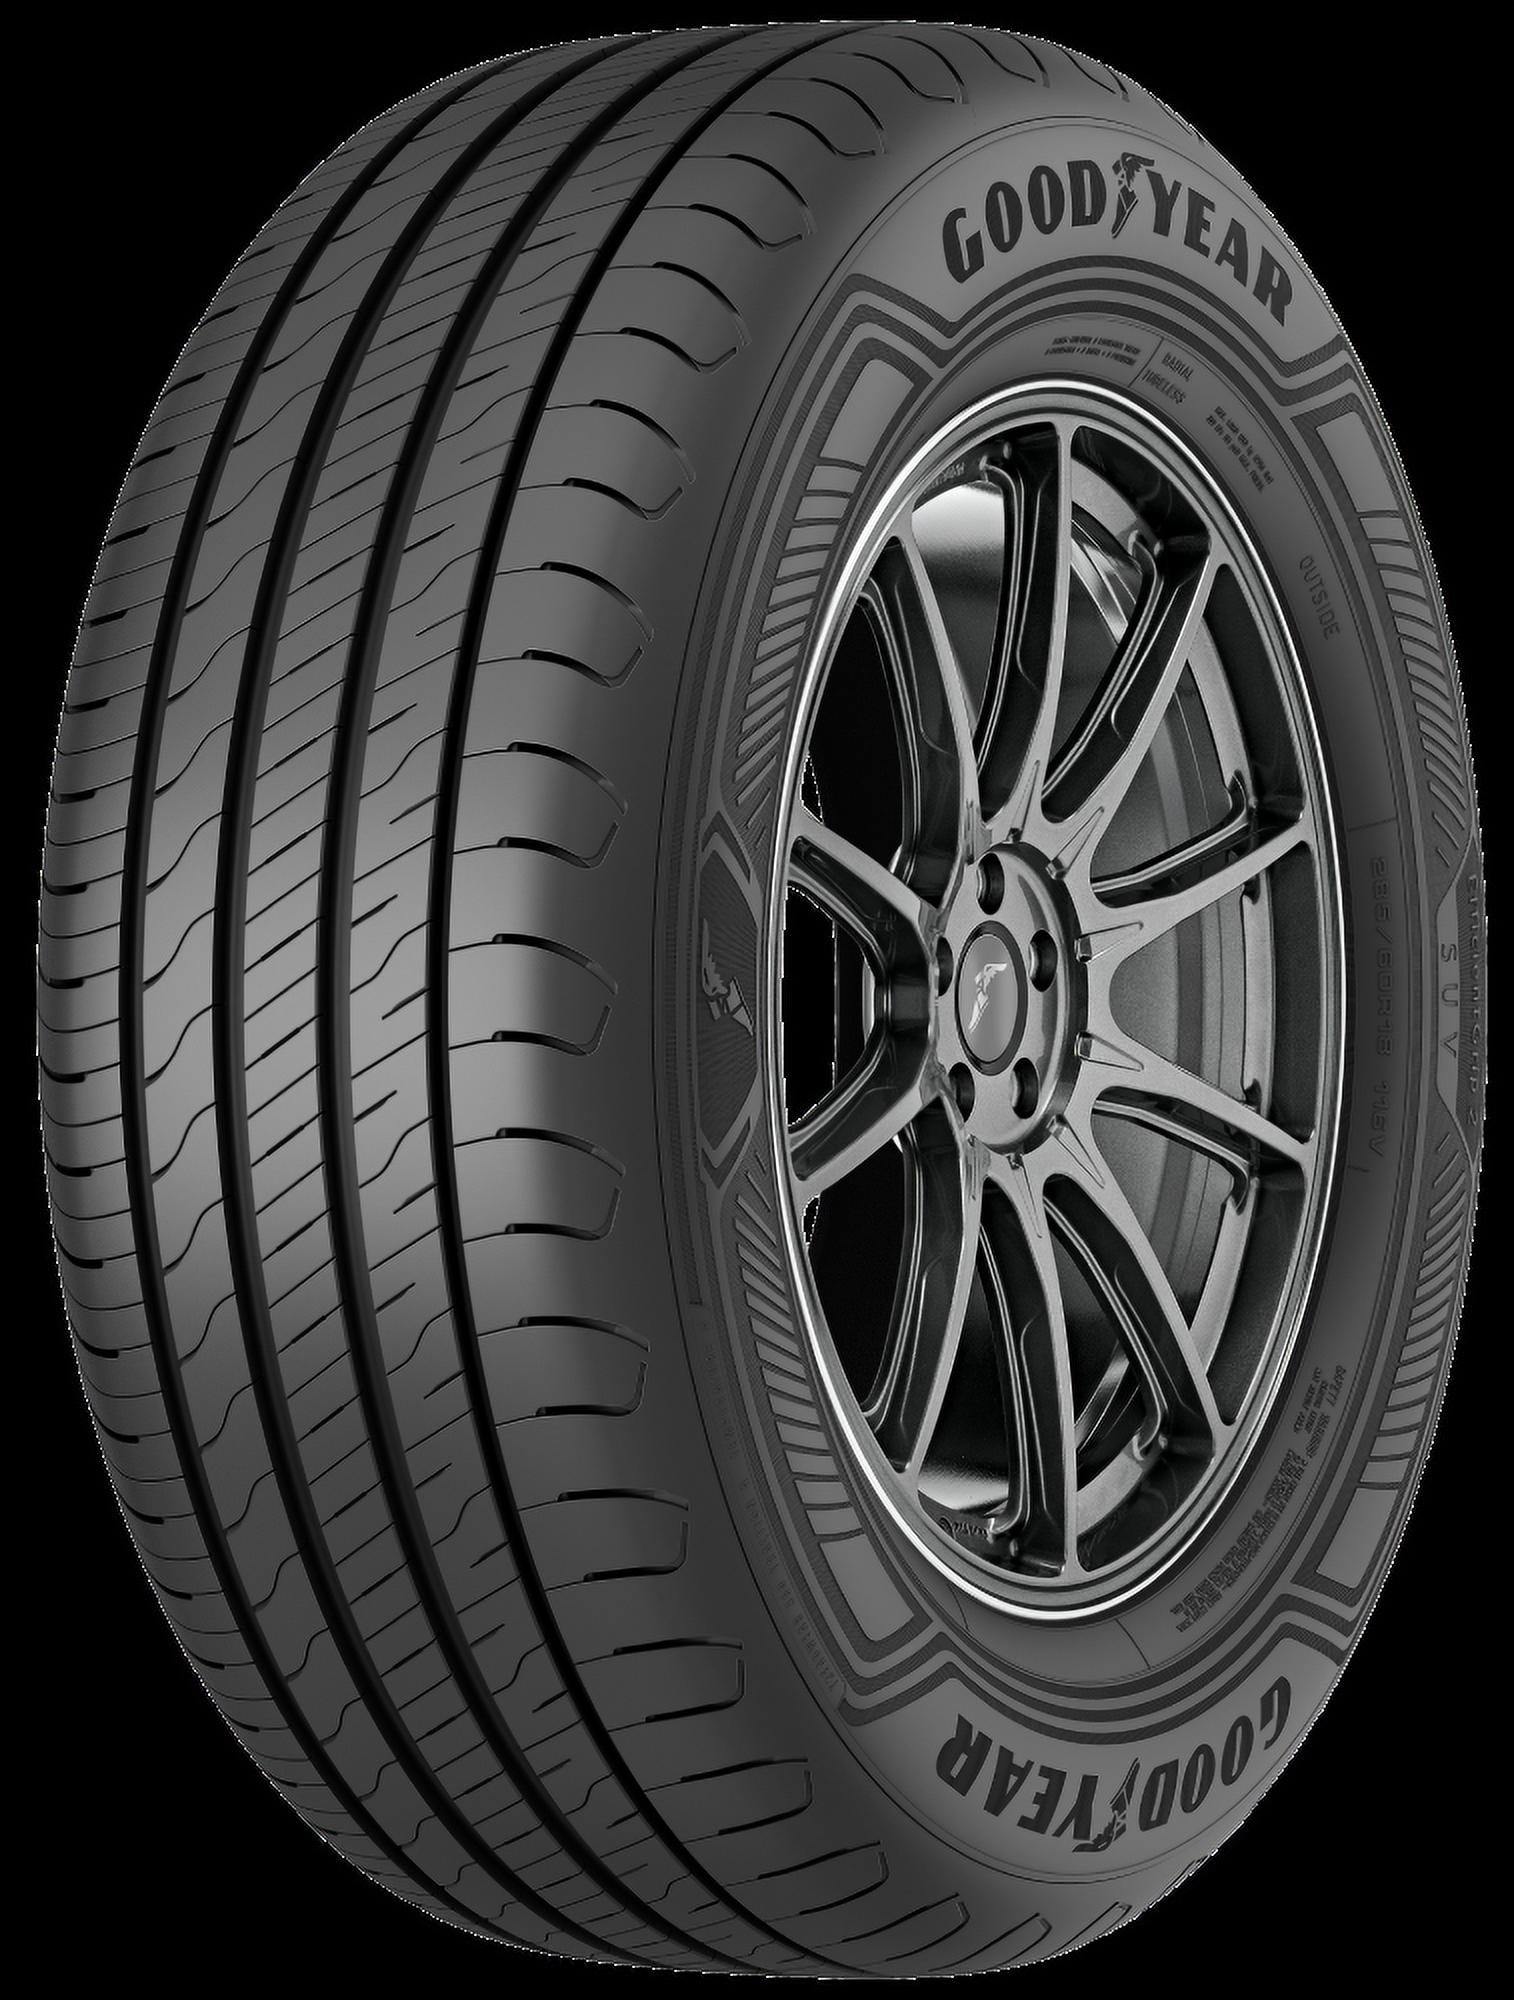 GOODYEAR EFFICIENT GRIP 2012-18 Cruze 2012-15 PERFORMANCE Electric Ford Focus LT, Chevrolet 2 225/50R17 94W Fits